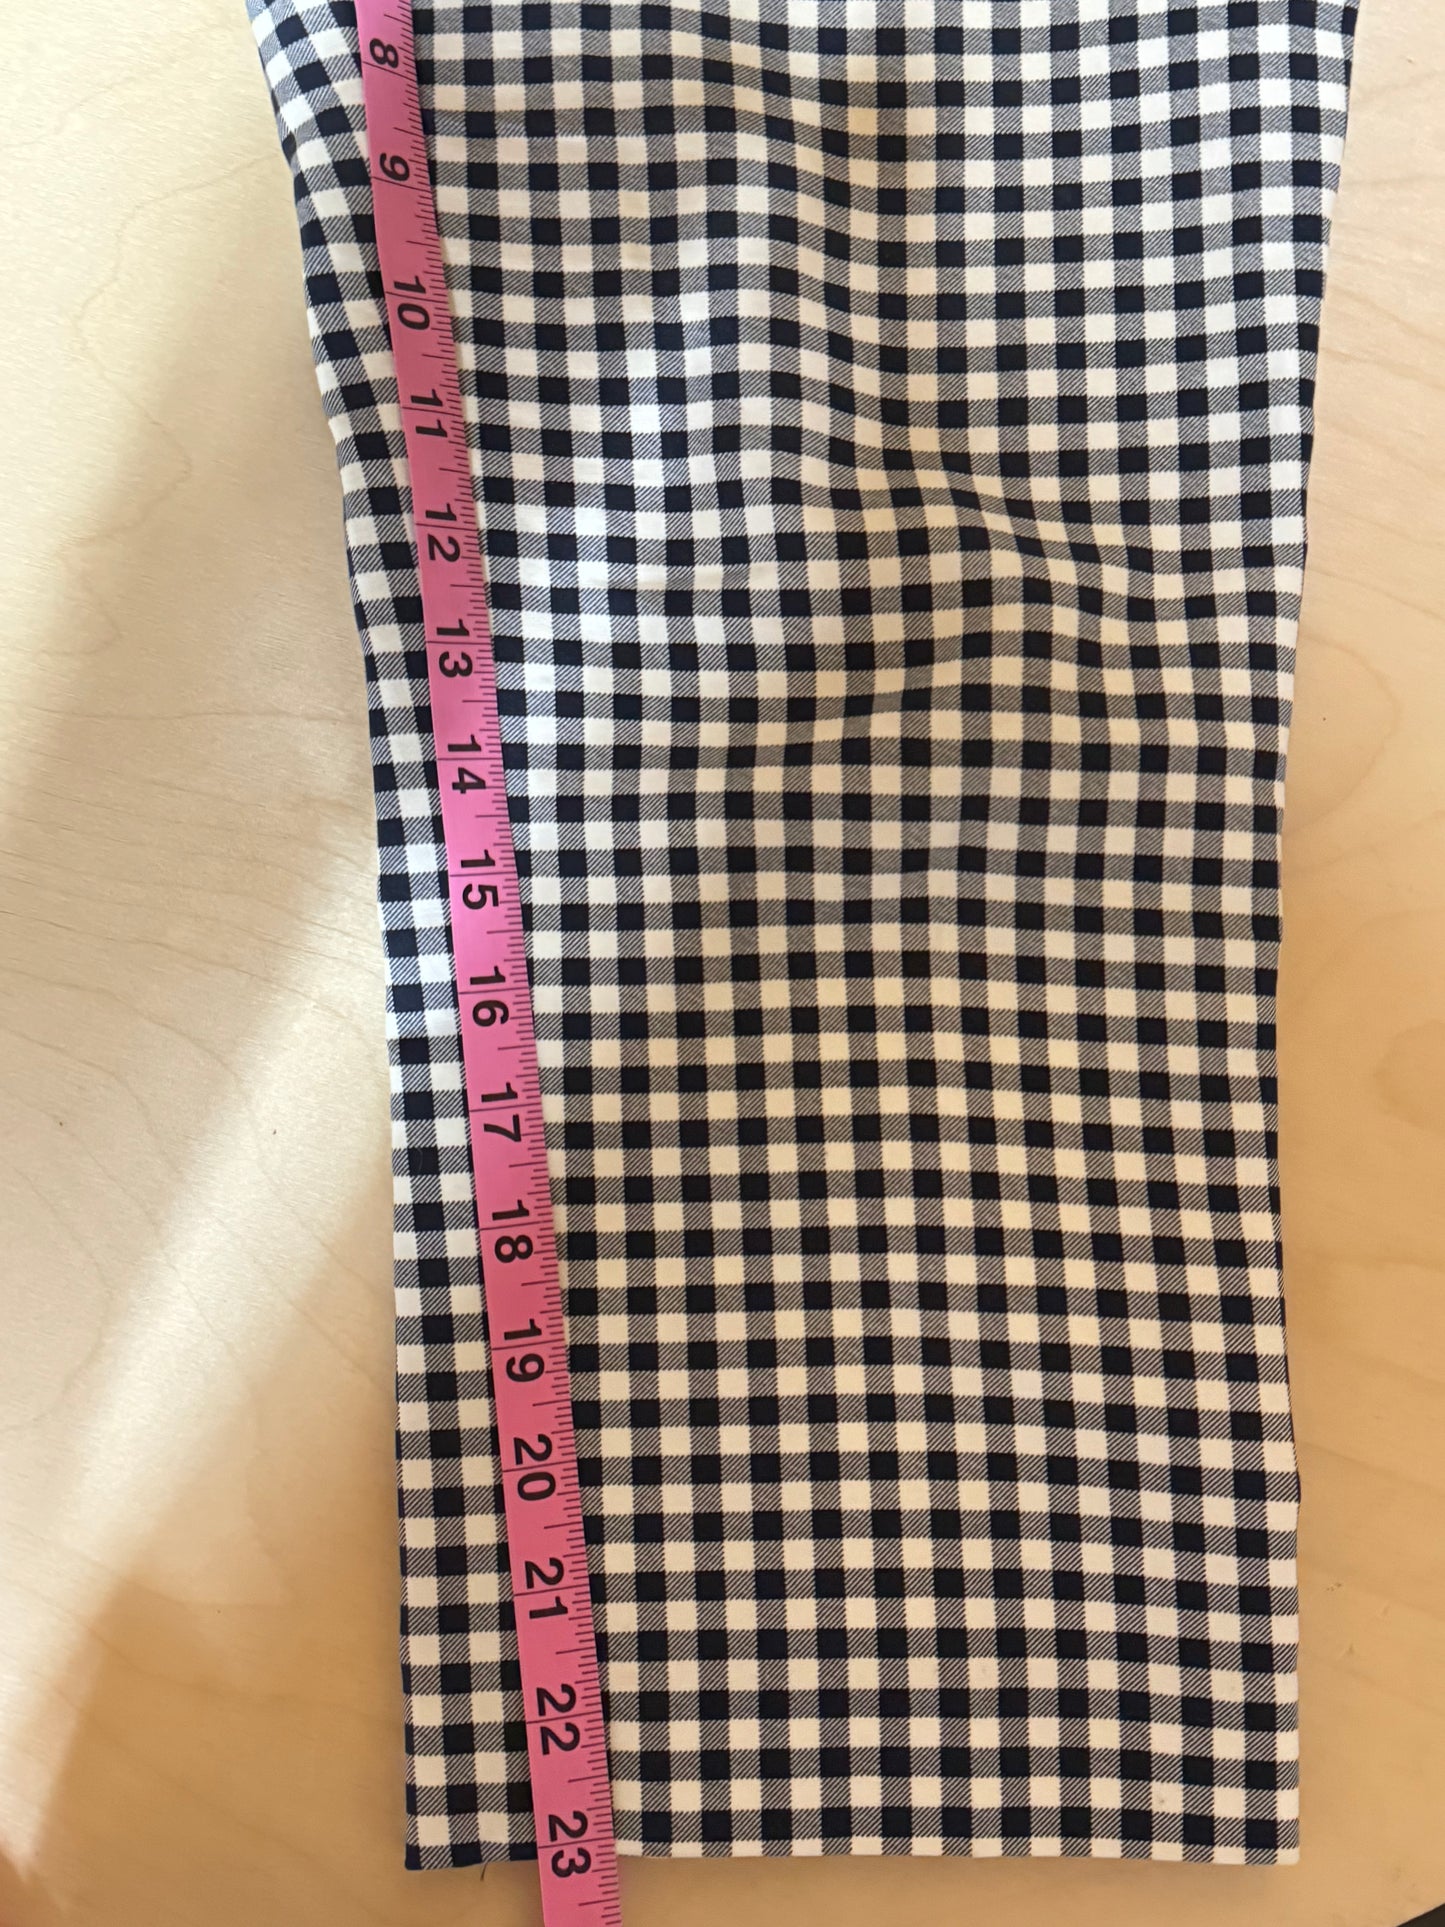 Adrianna Papell Men's Checked Chinos Size Black/White - Size 8 (US)